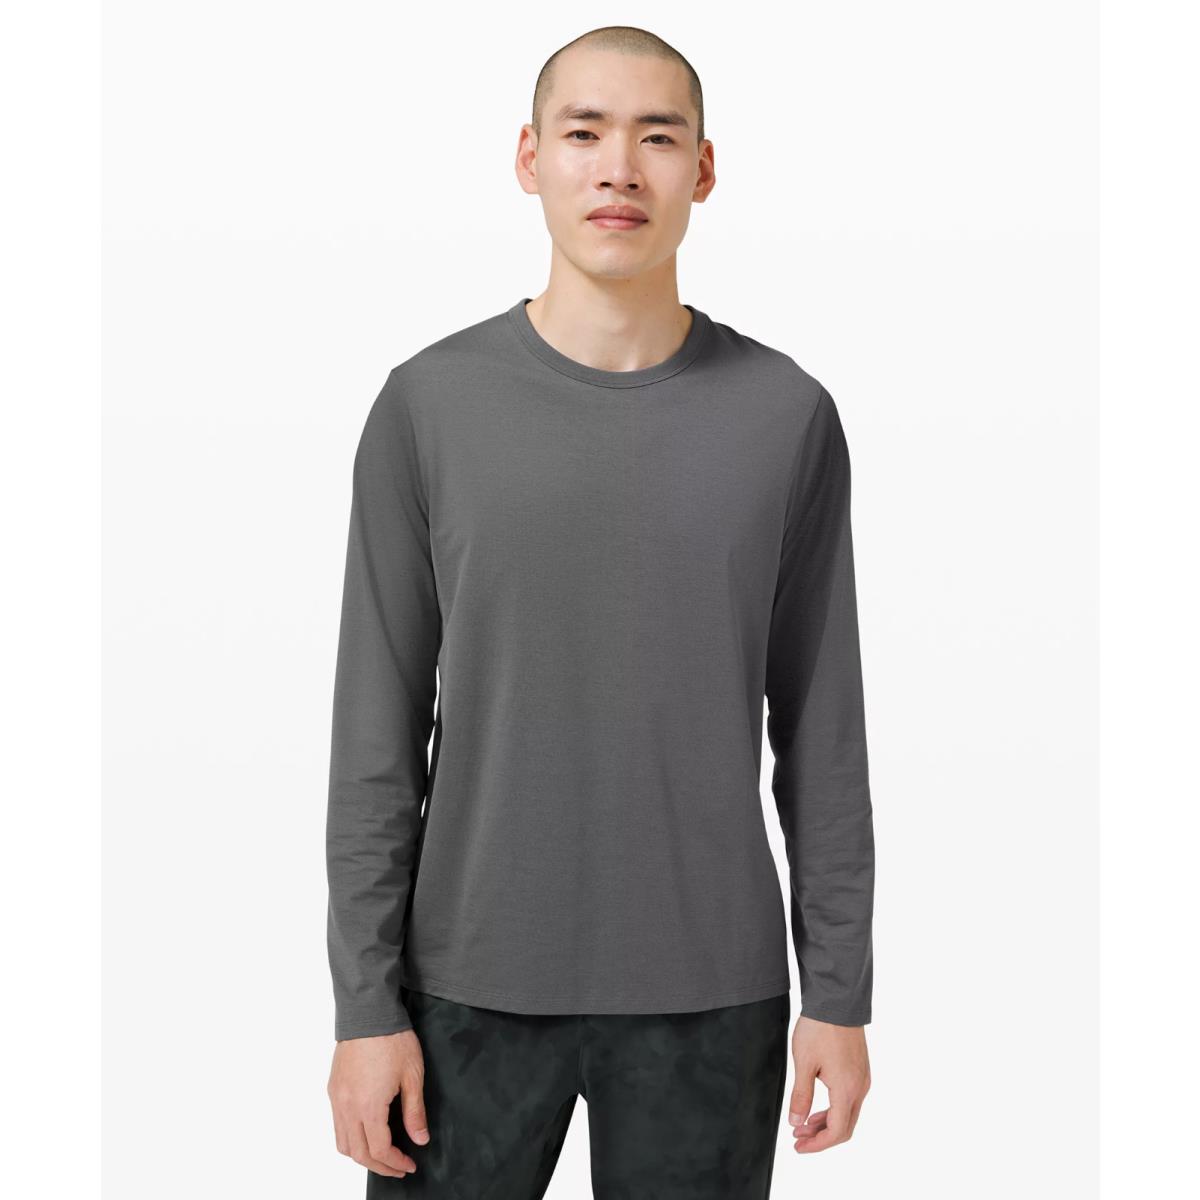 Lululemon The Fundamental Long Sleeve T Shirt in Anchor LM3CZRS Med